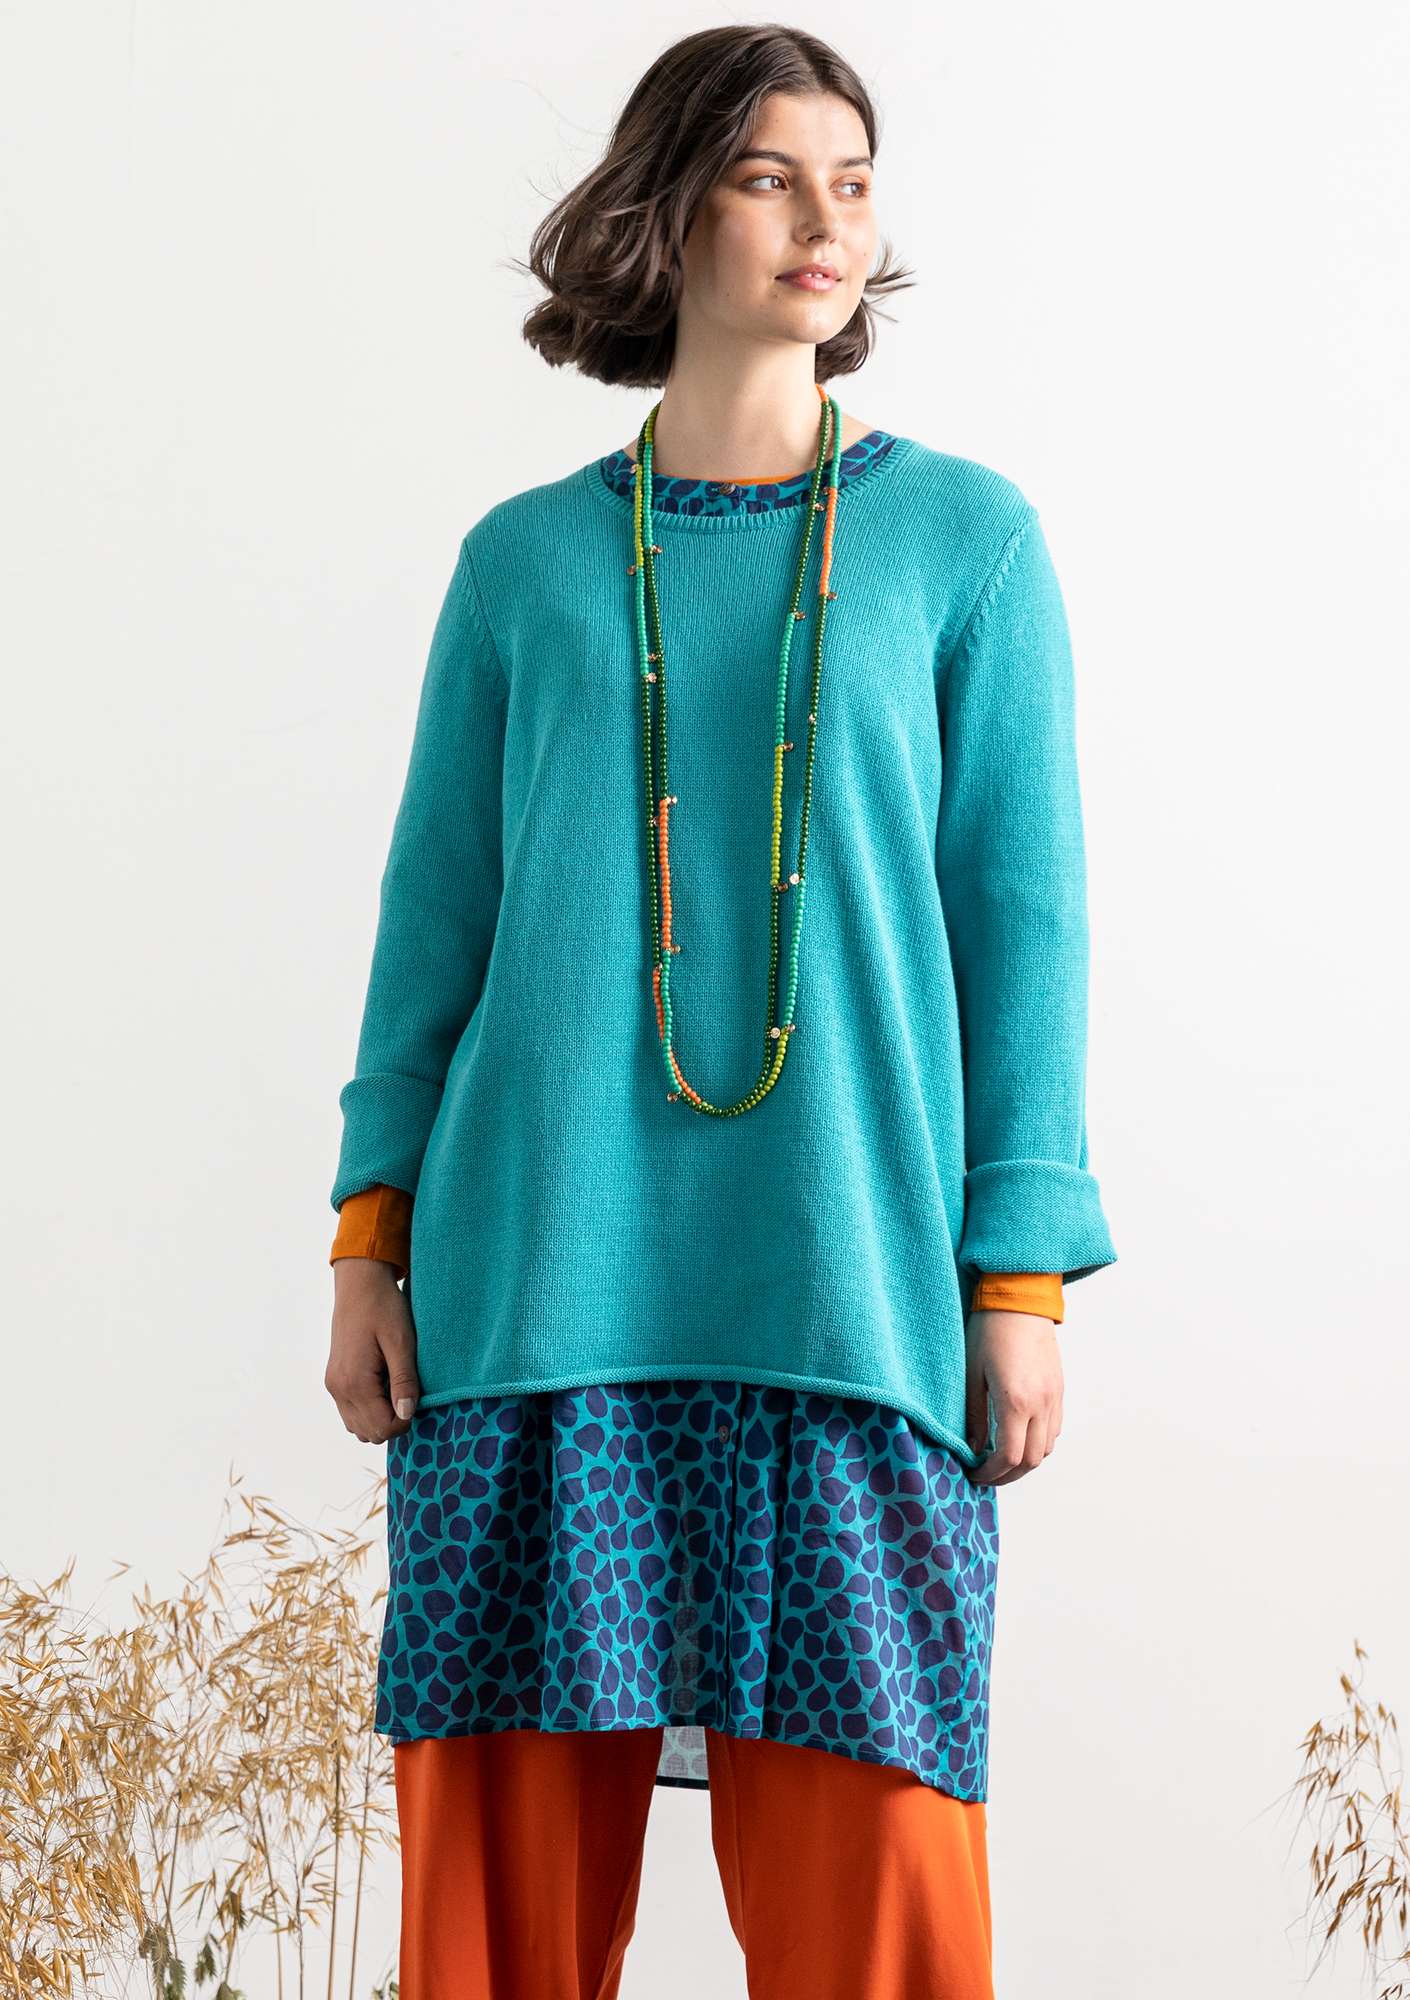 “Adena” BÄSTIS sweater in recycled cotton turquoise